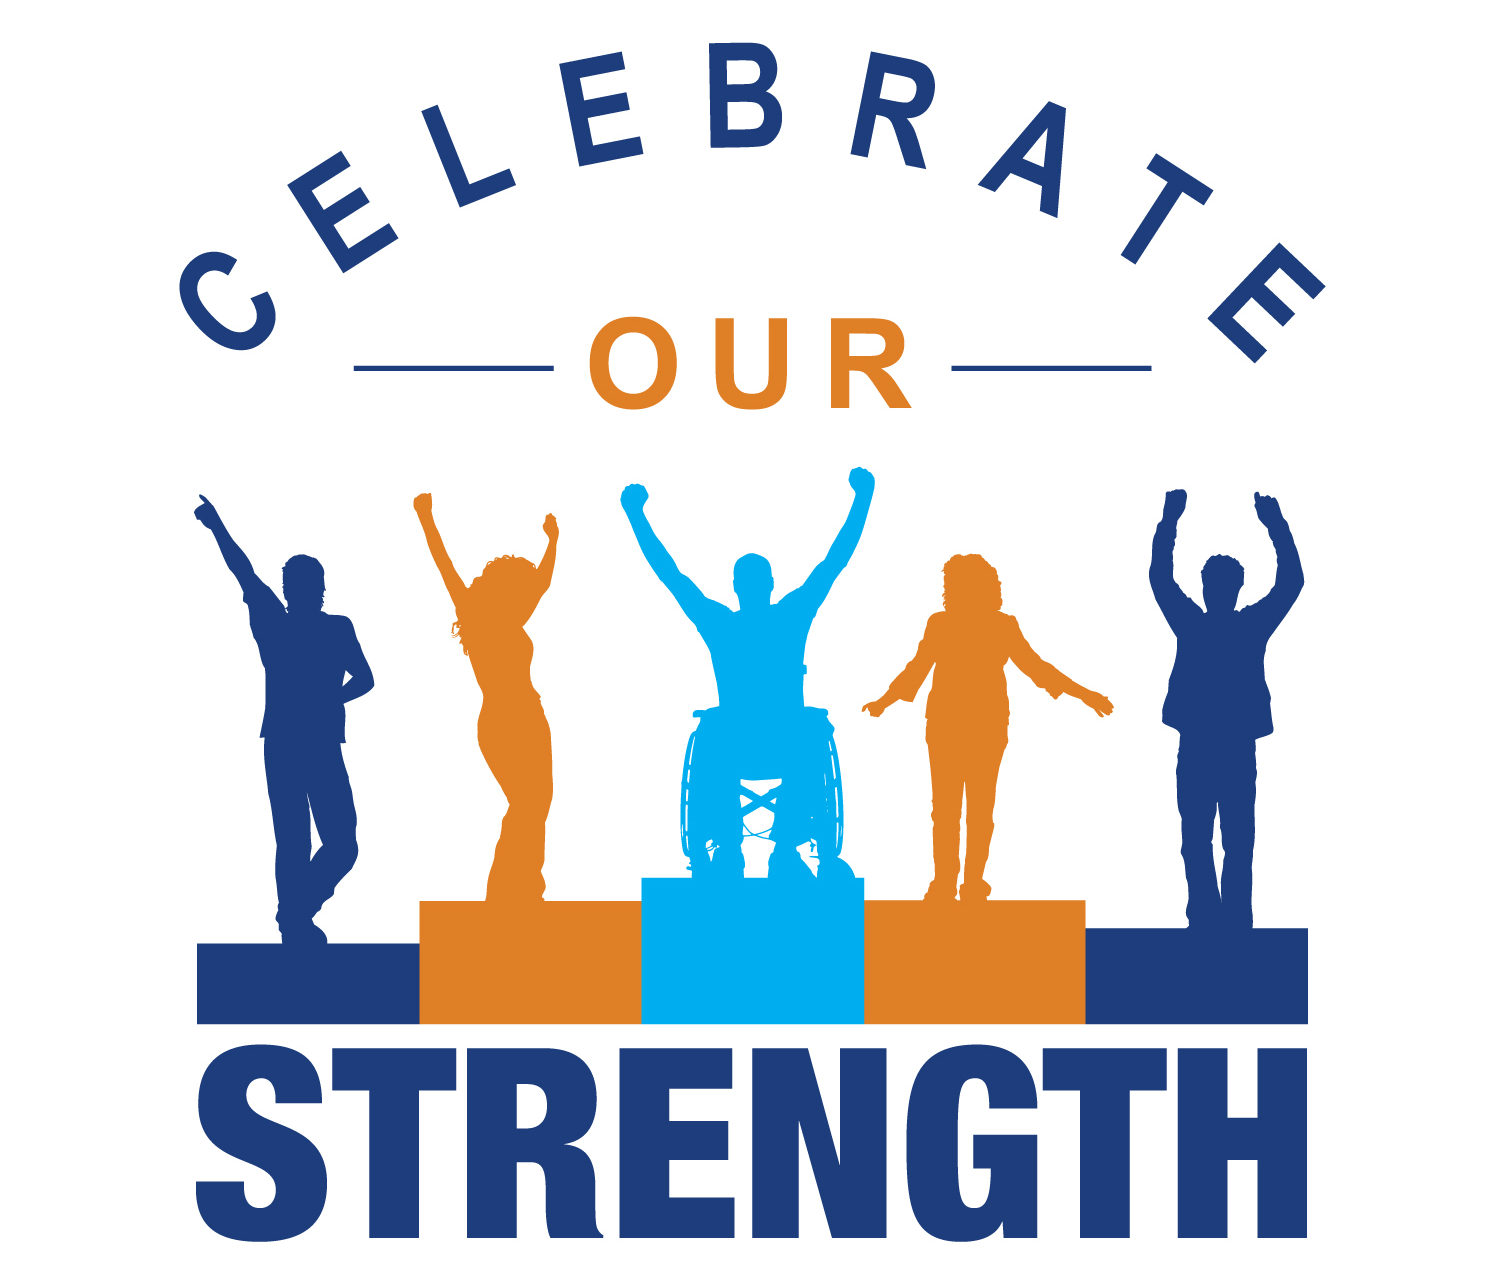 Four silhouettes standing and fifth, middle silhouette sitting in wheelchair on podiums with hands in the air in dark blue, orange, and light blue. The words "celebrate our strength" surround the image